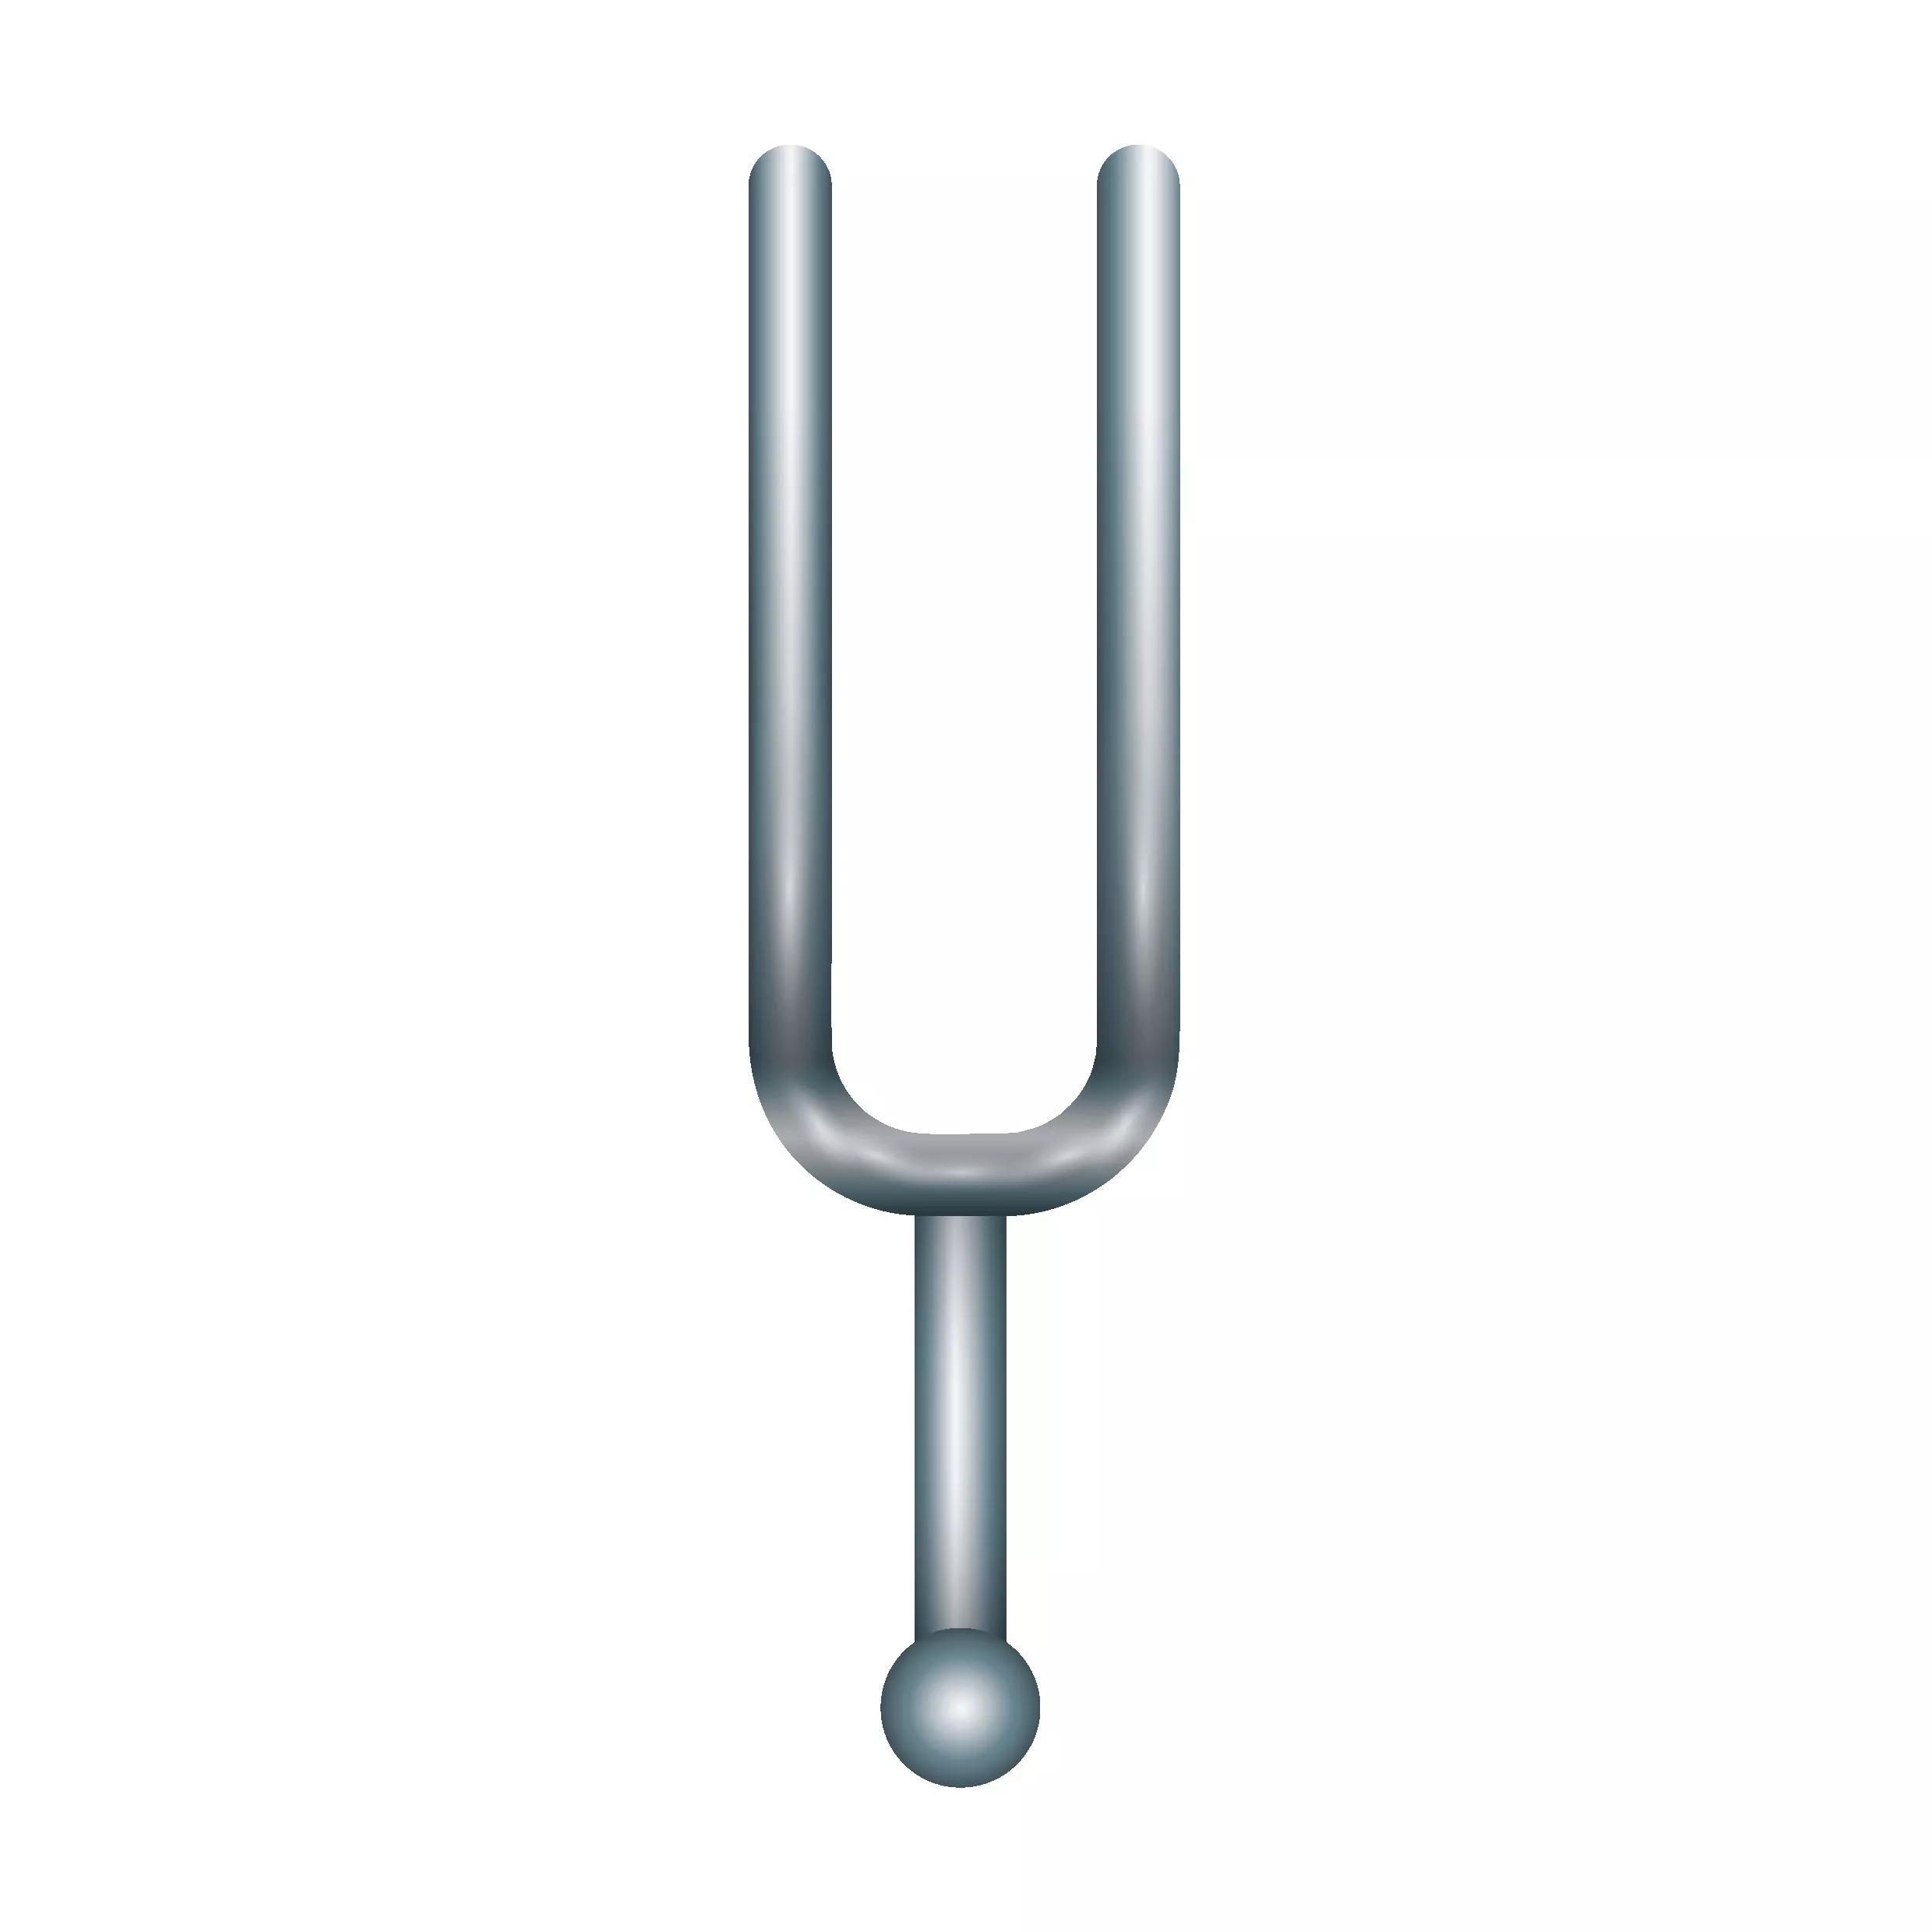 tuning fork